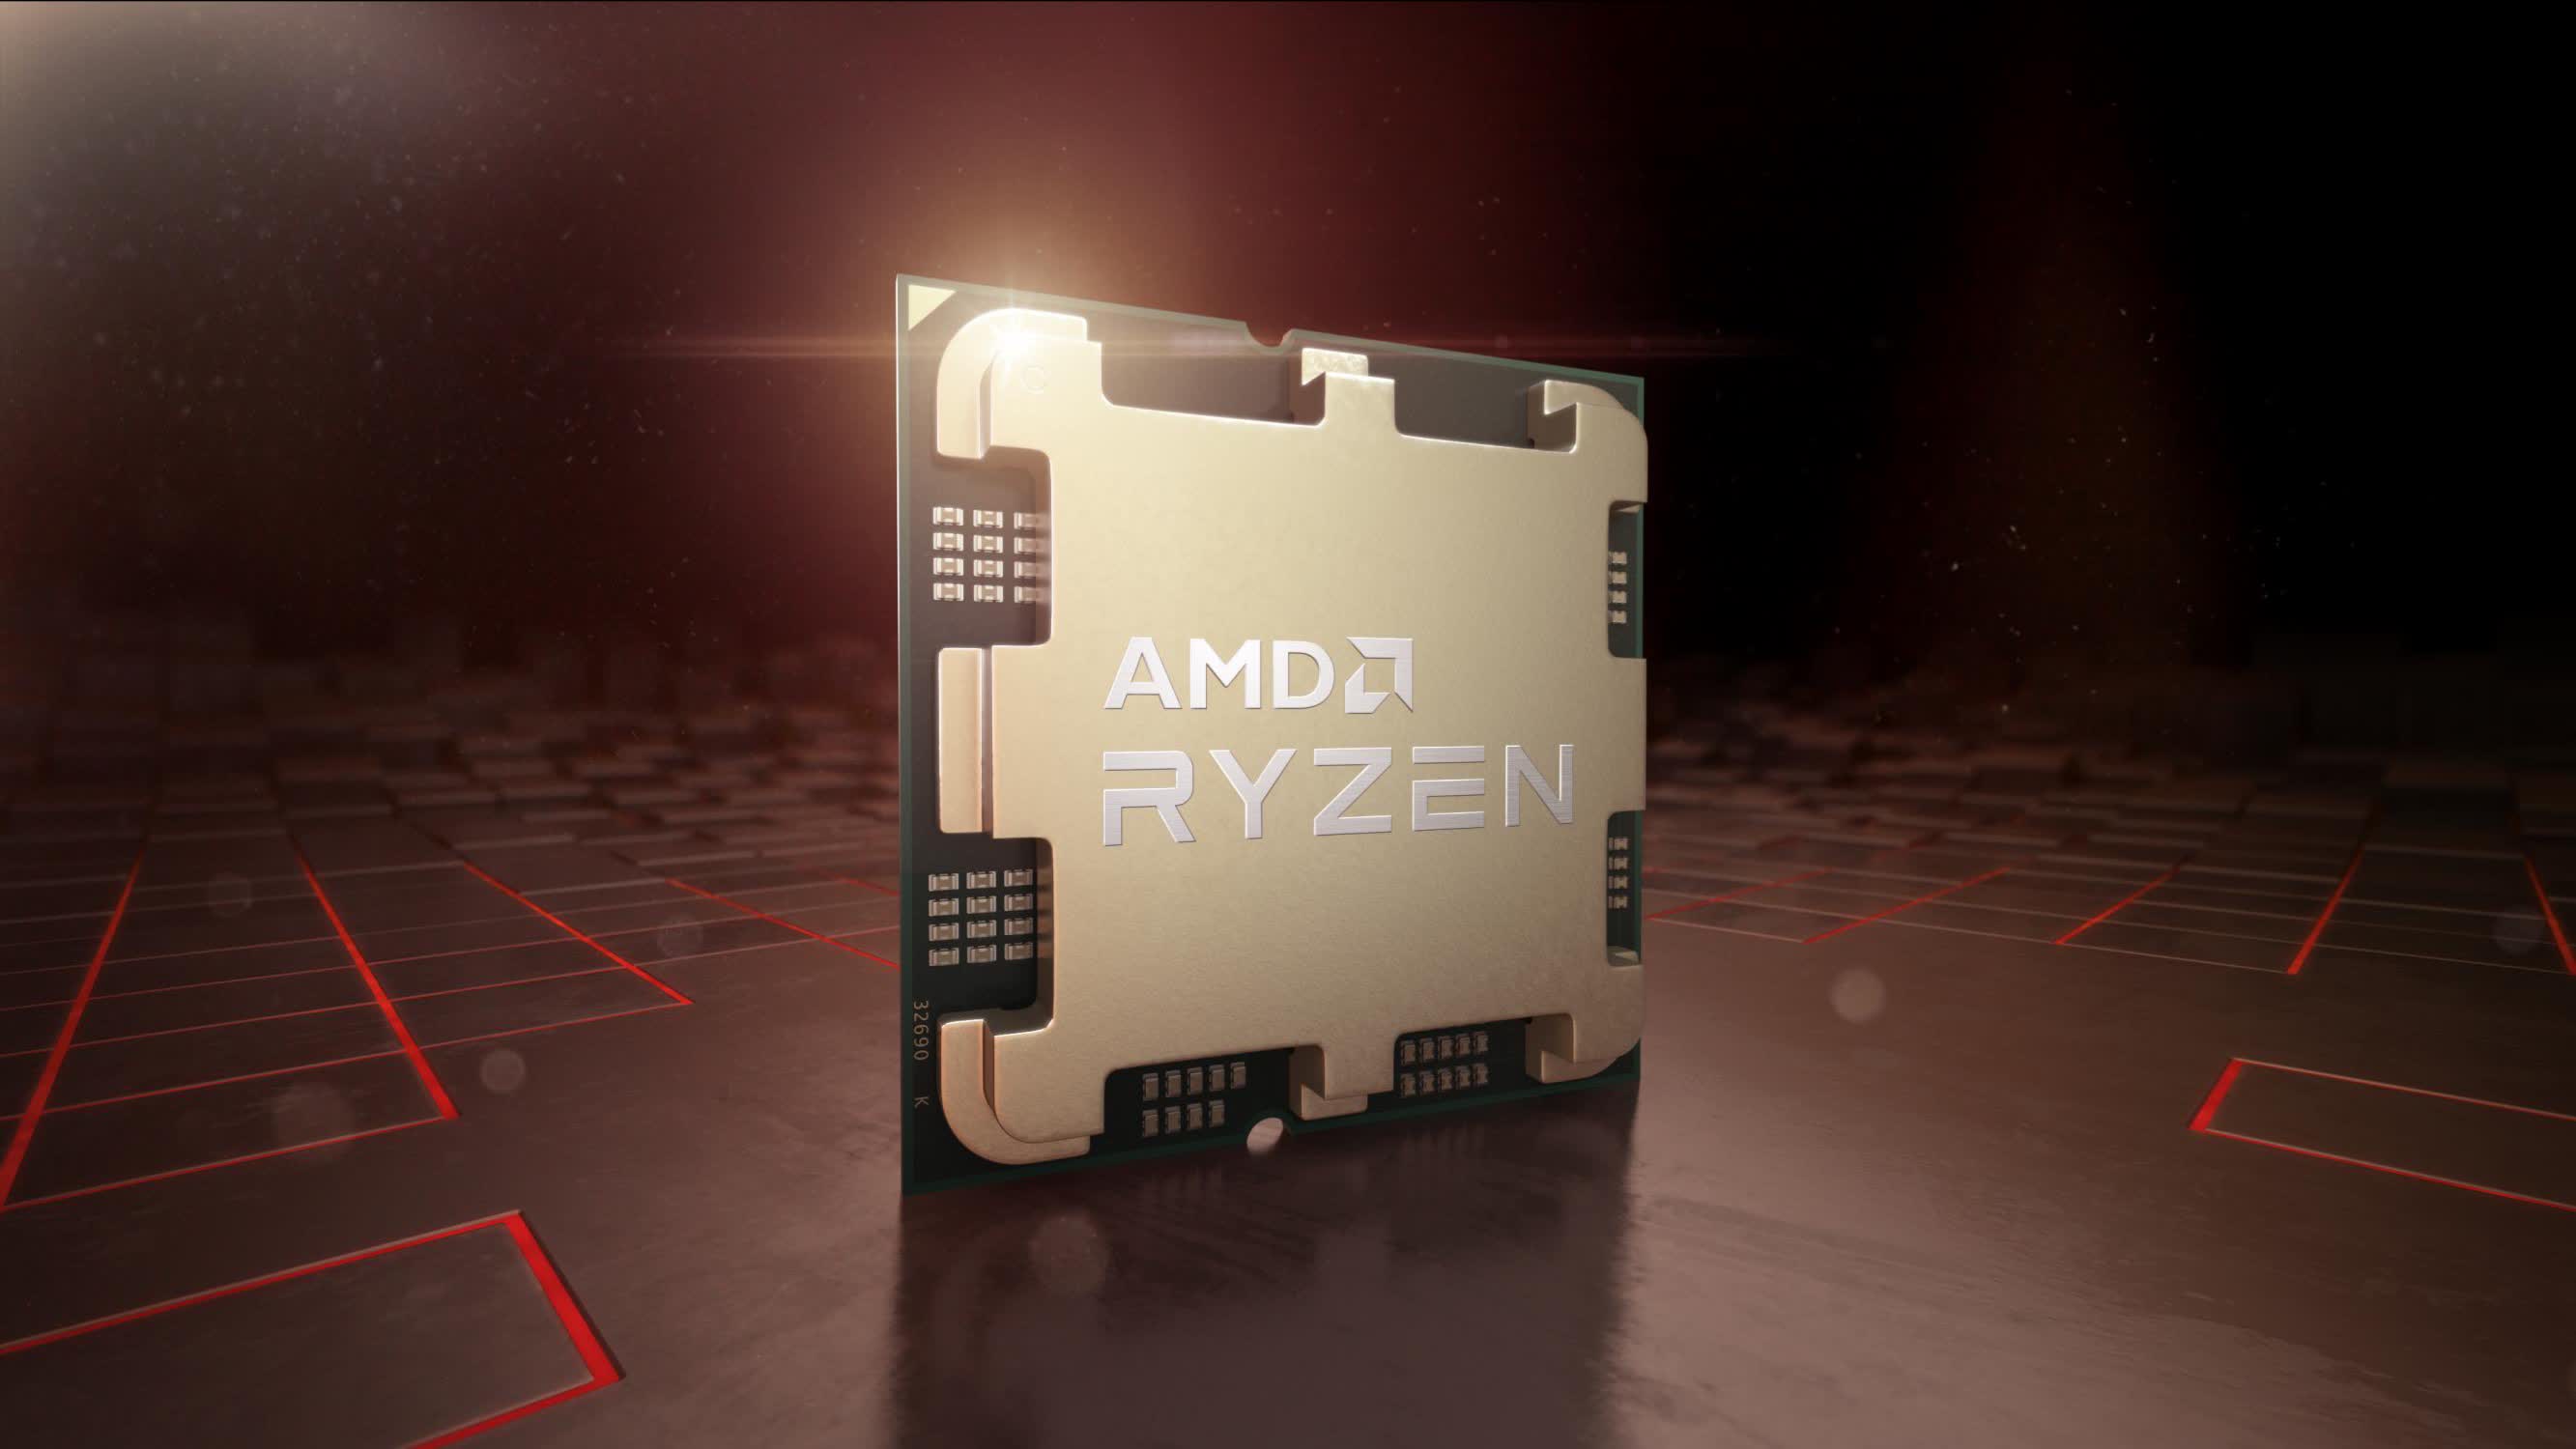 Upcoming AMD Dragon Range mobile processors will supposedly feature up to 16 cores